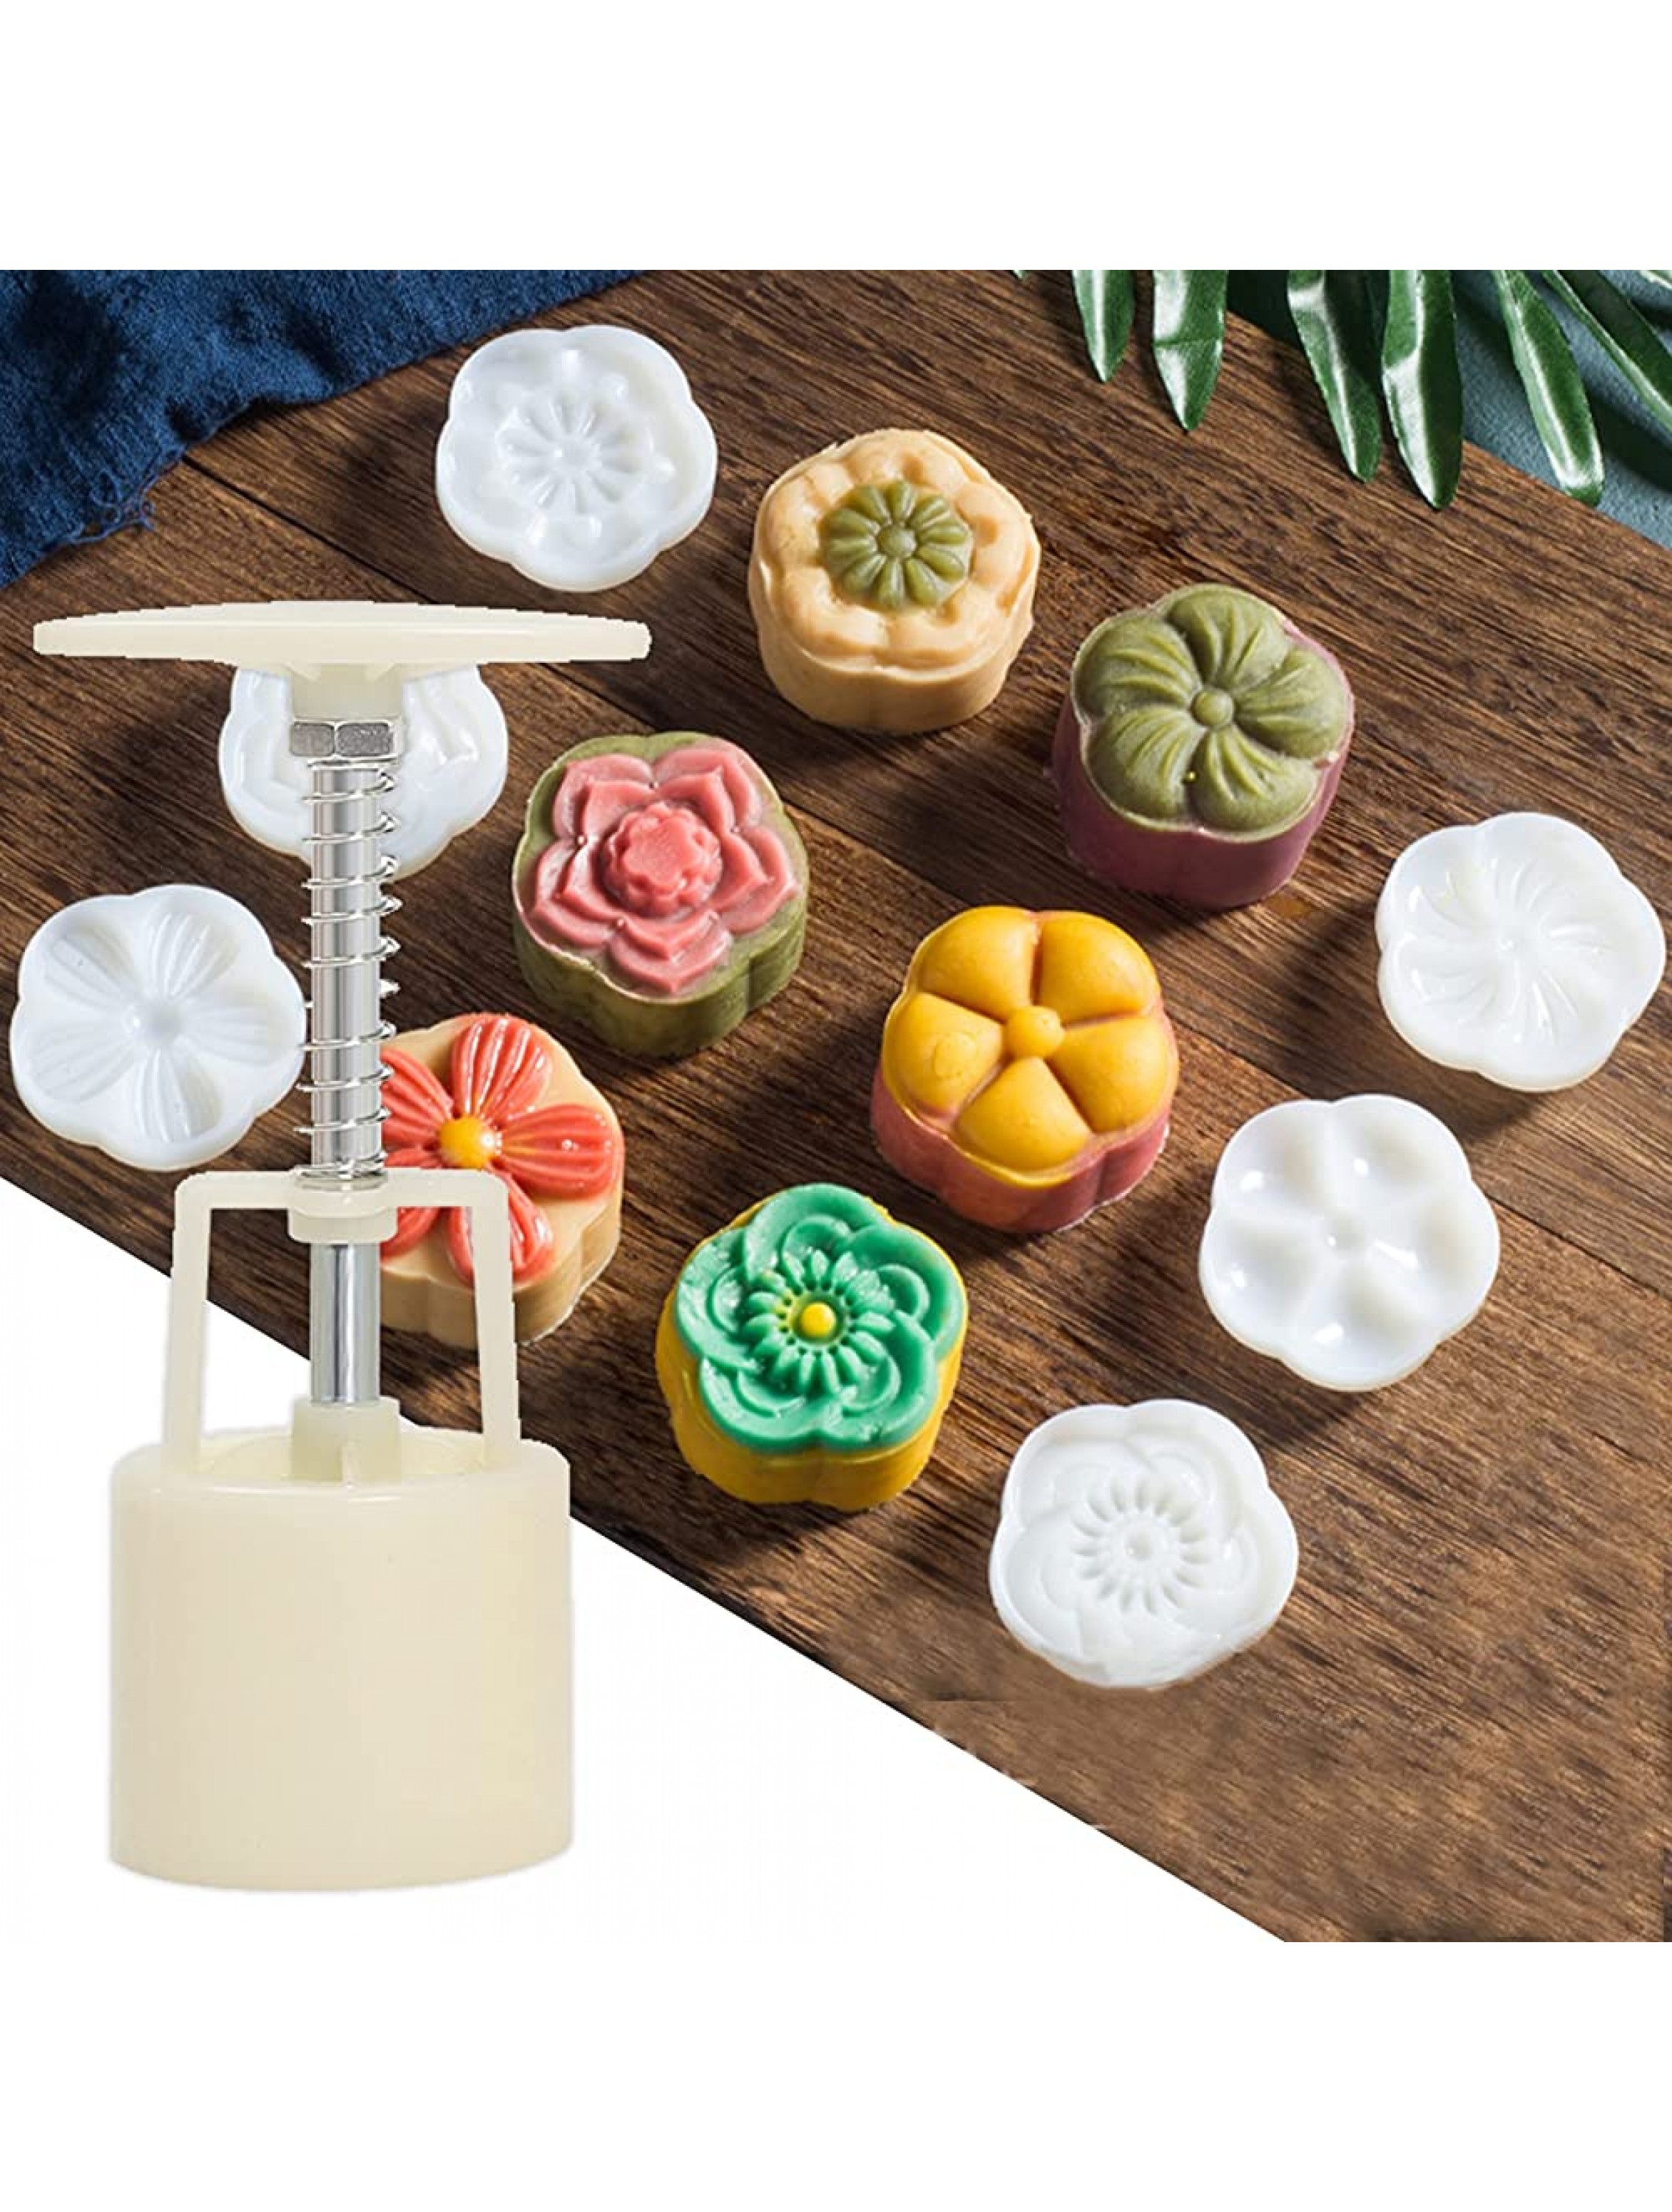 Mooncake Molds Set Mid-Autumn Festival Hand-Pressure Moon Cake maker 6 pcs for baking DIY Hand Press Cookie Stamps Pastry Tool1 Mold 6 Stamps. 50G - BK1FVYY83